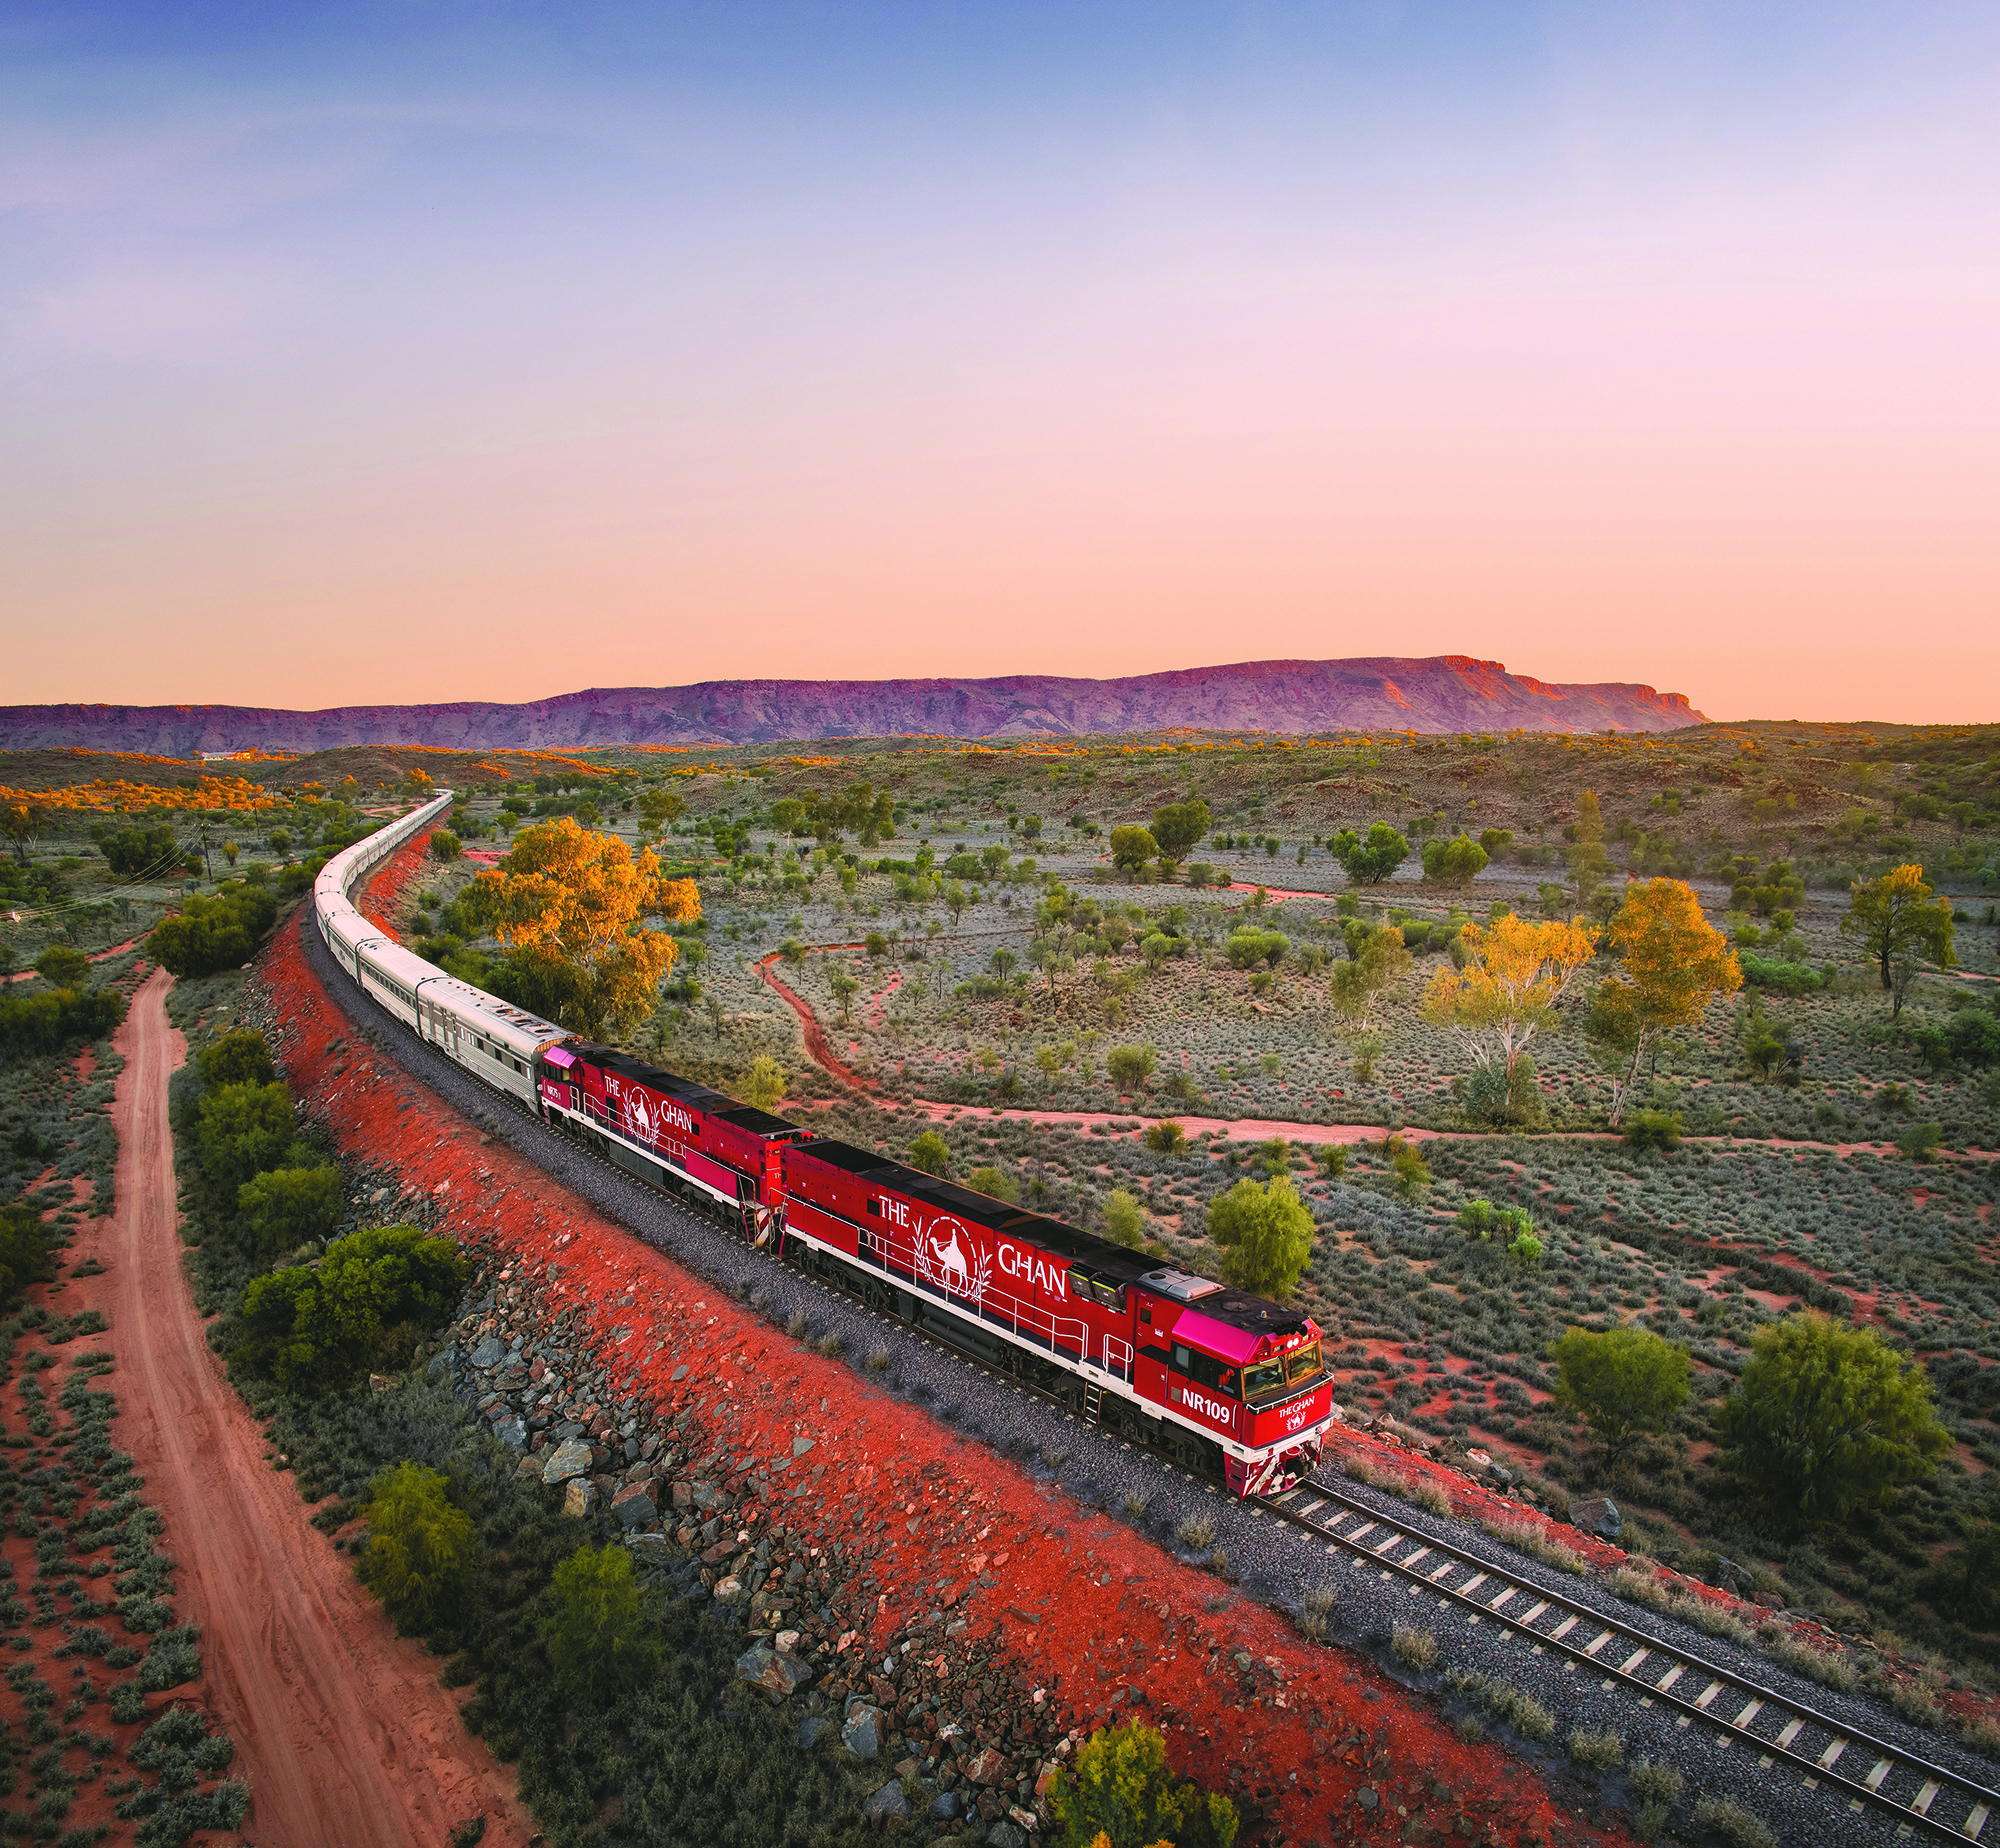 Holiday for train lovers who enjoy Australia's remote outback and city stays from $549 per night